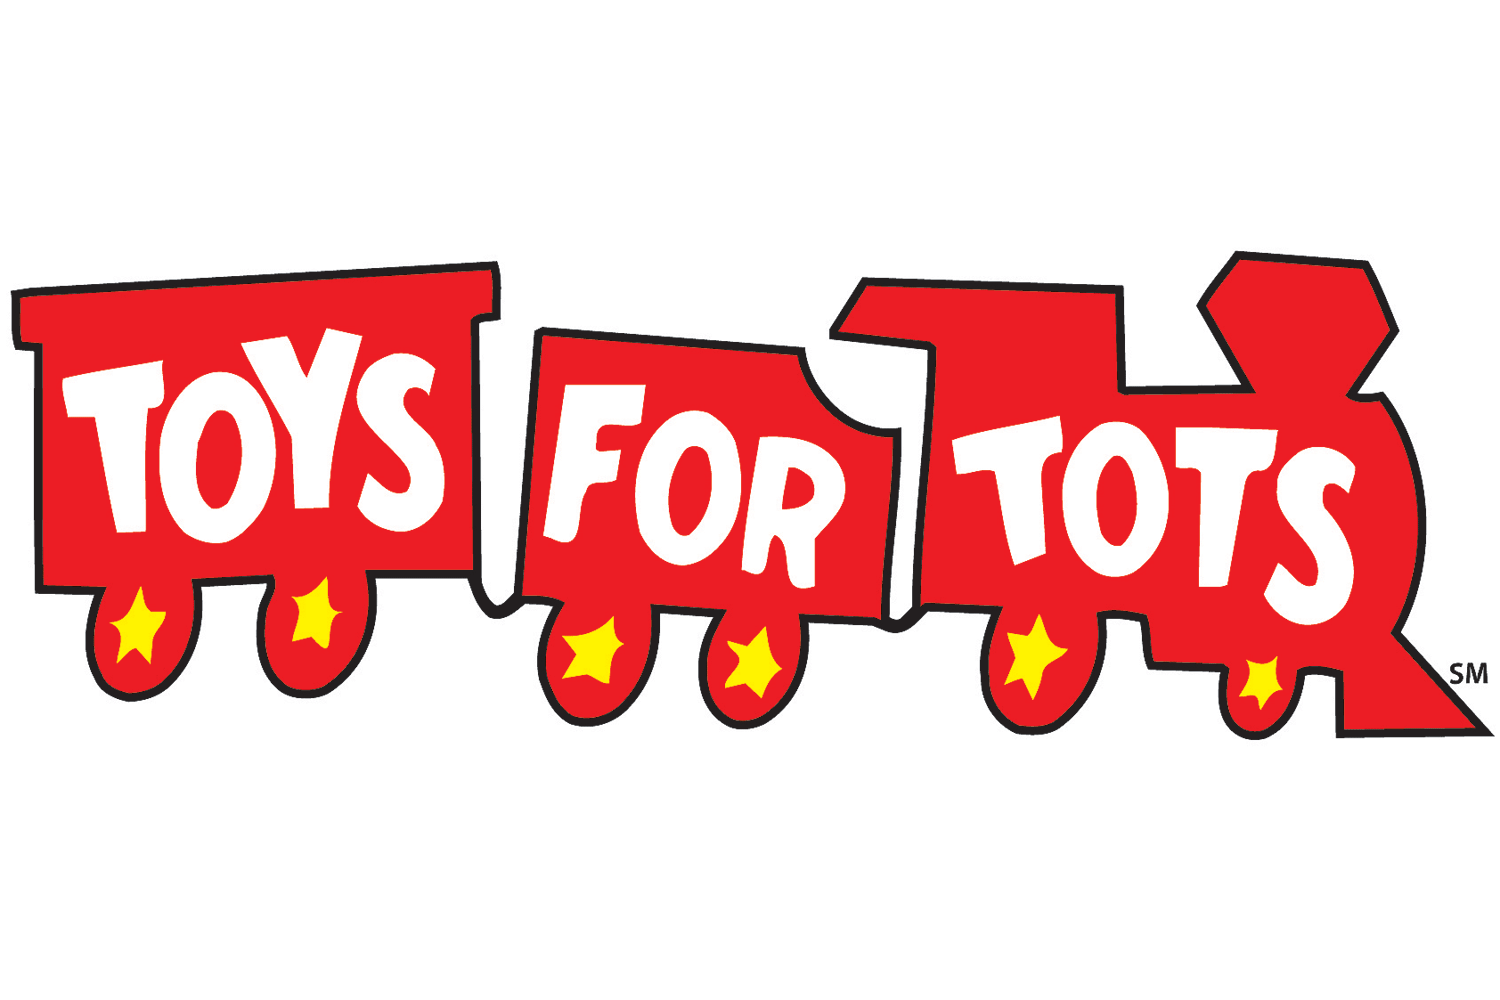 Giving Back - Toys For Tots